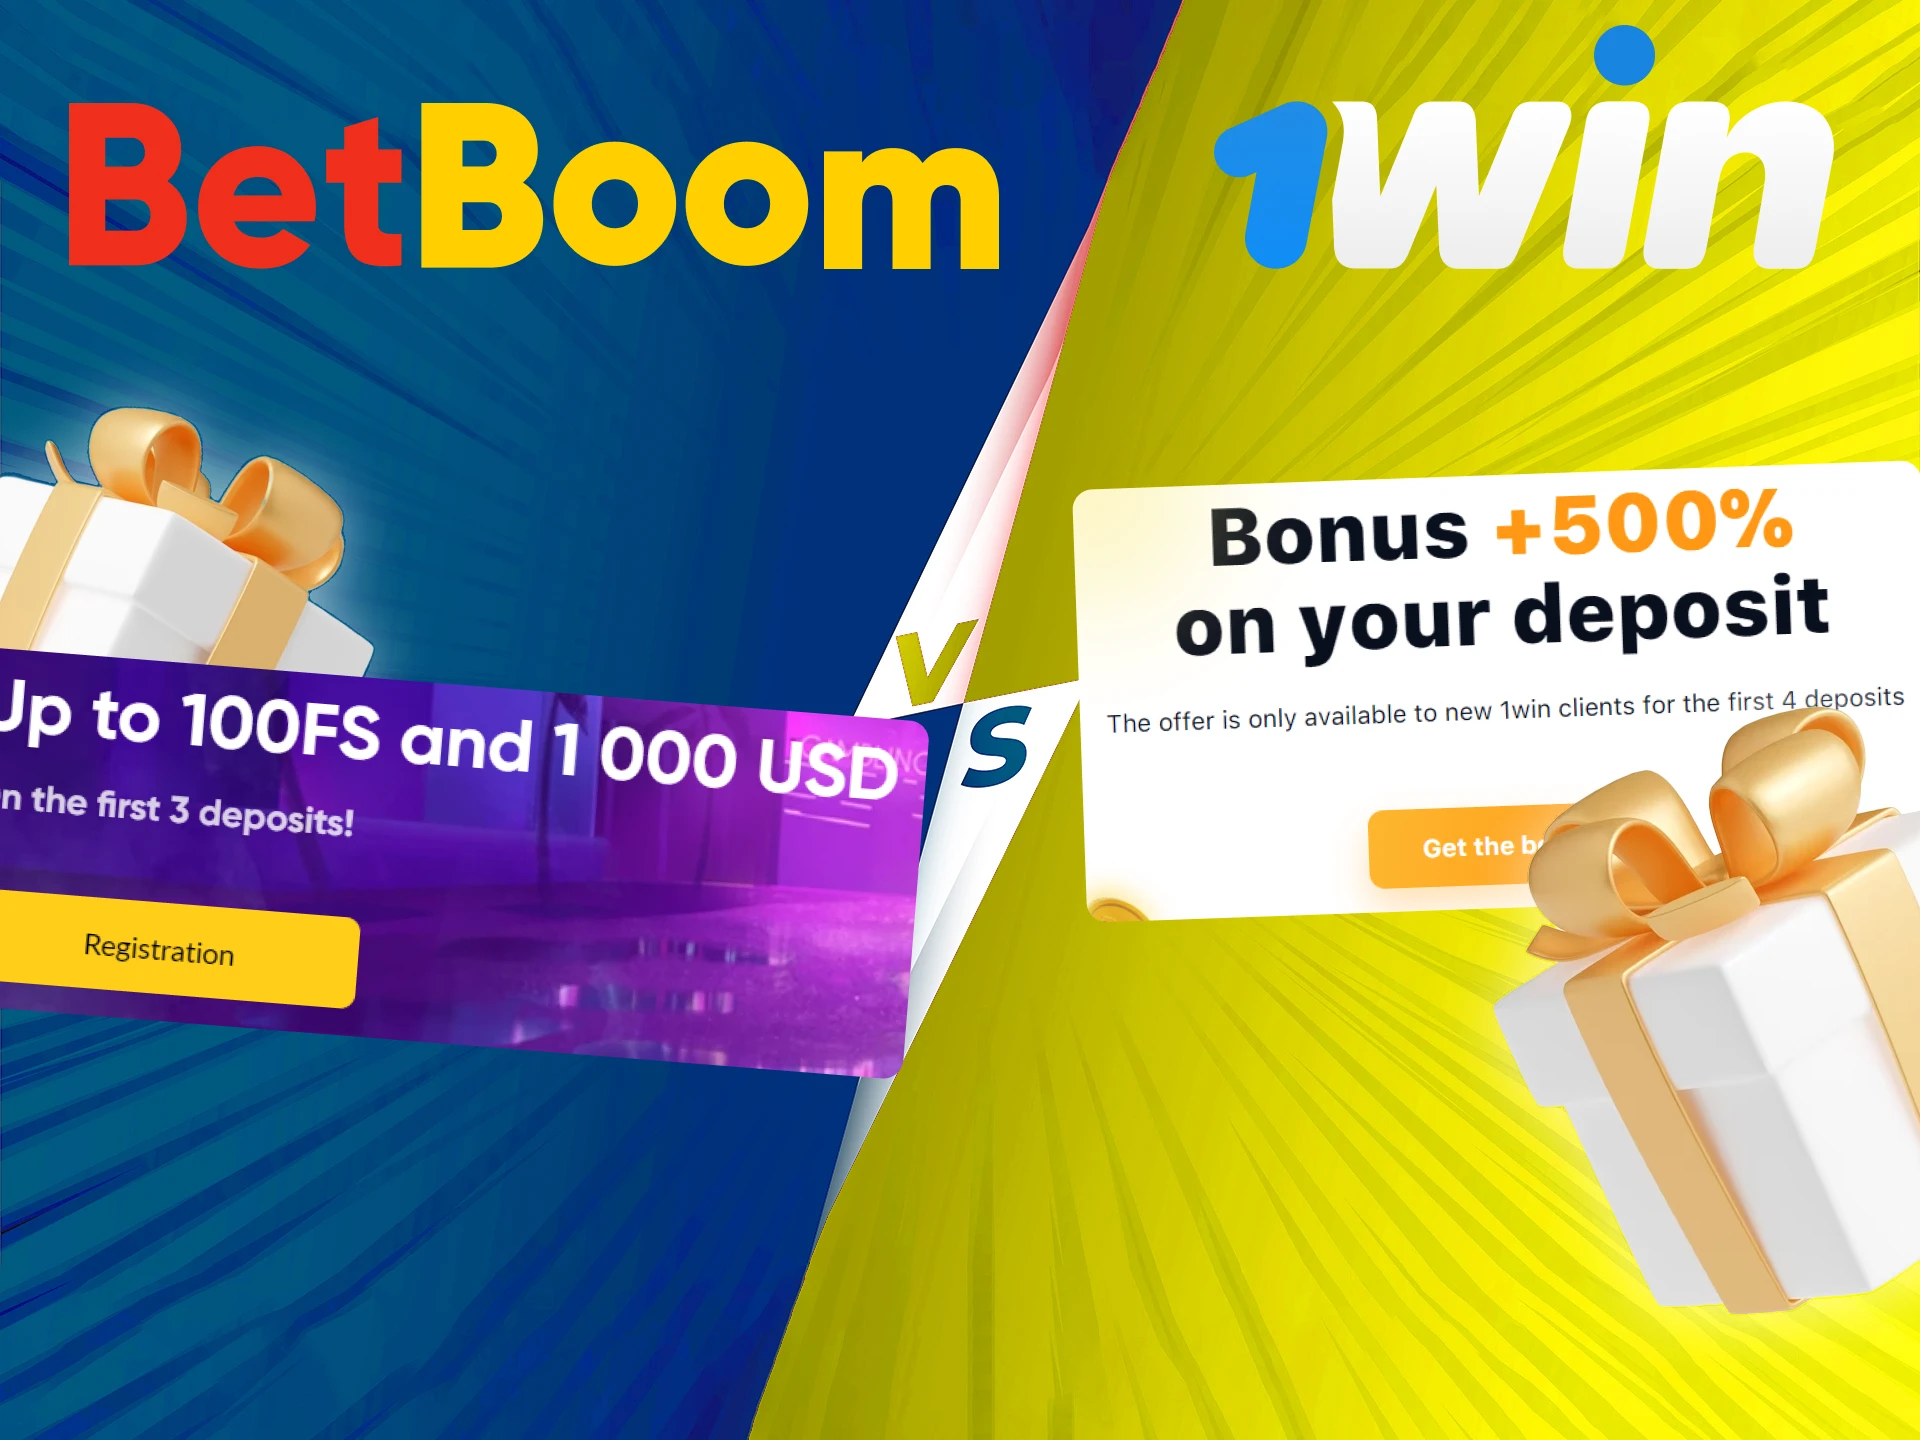 At 1win and BetBoom, new users can receive a welcome bonus.